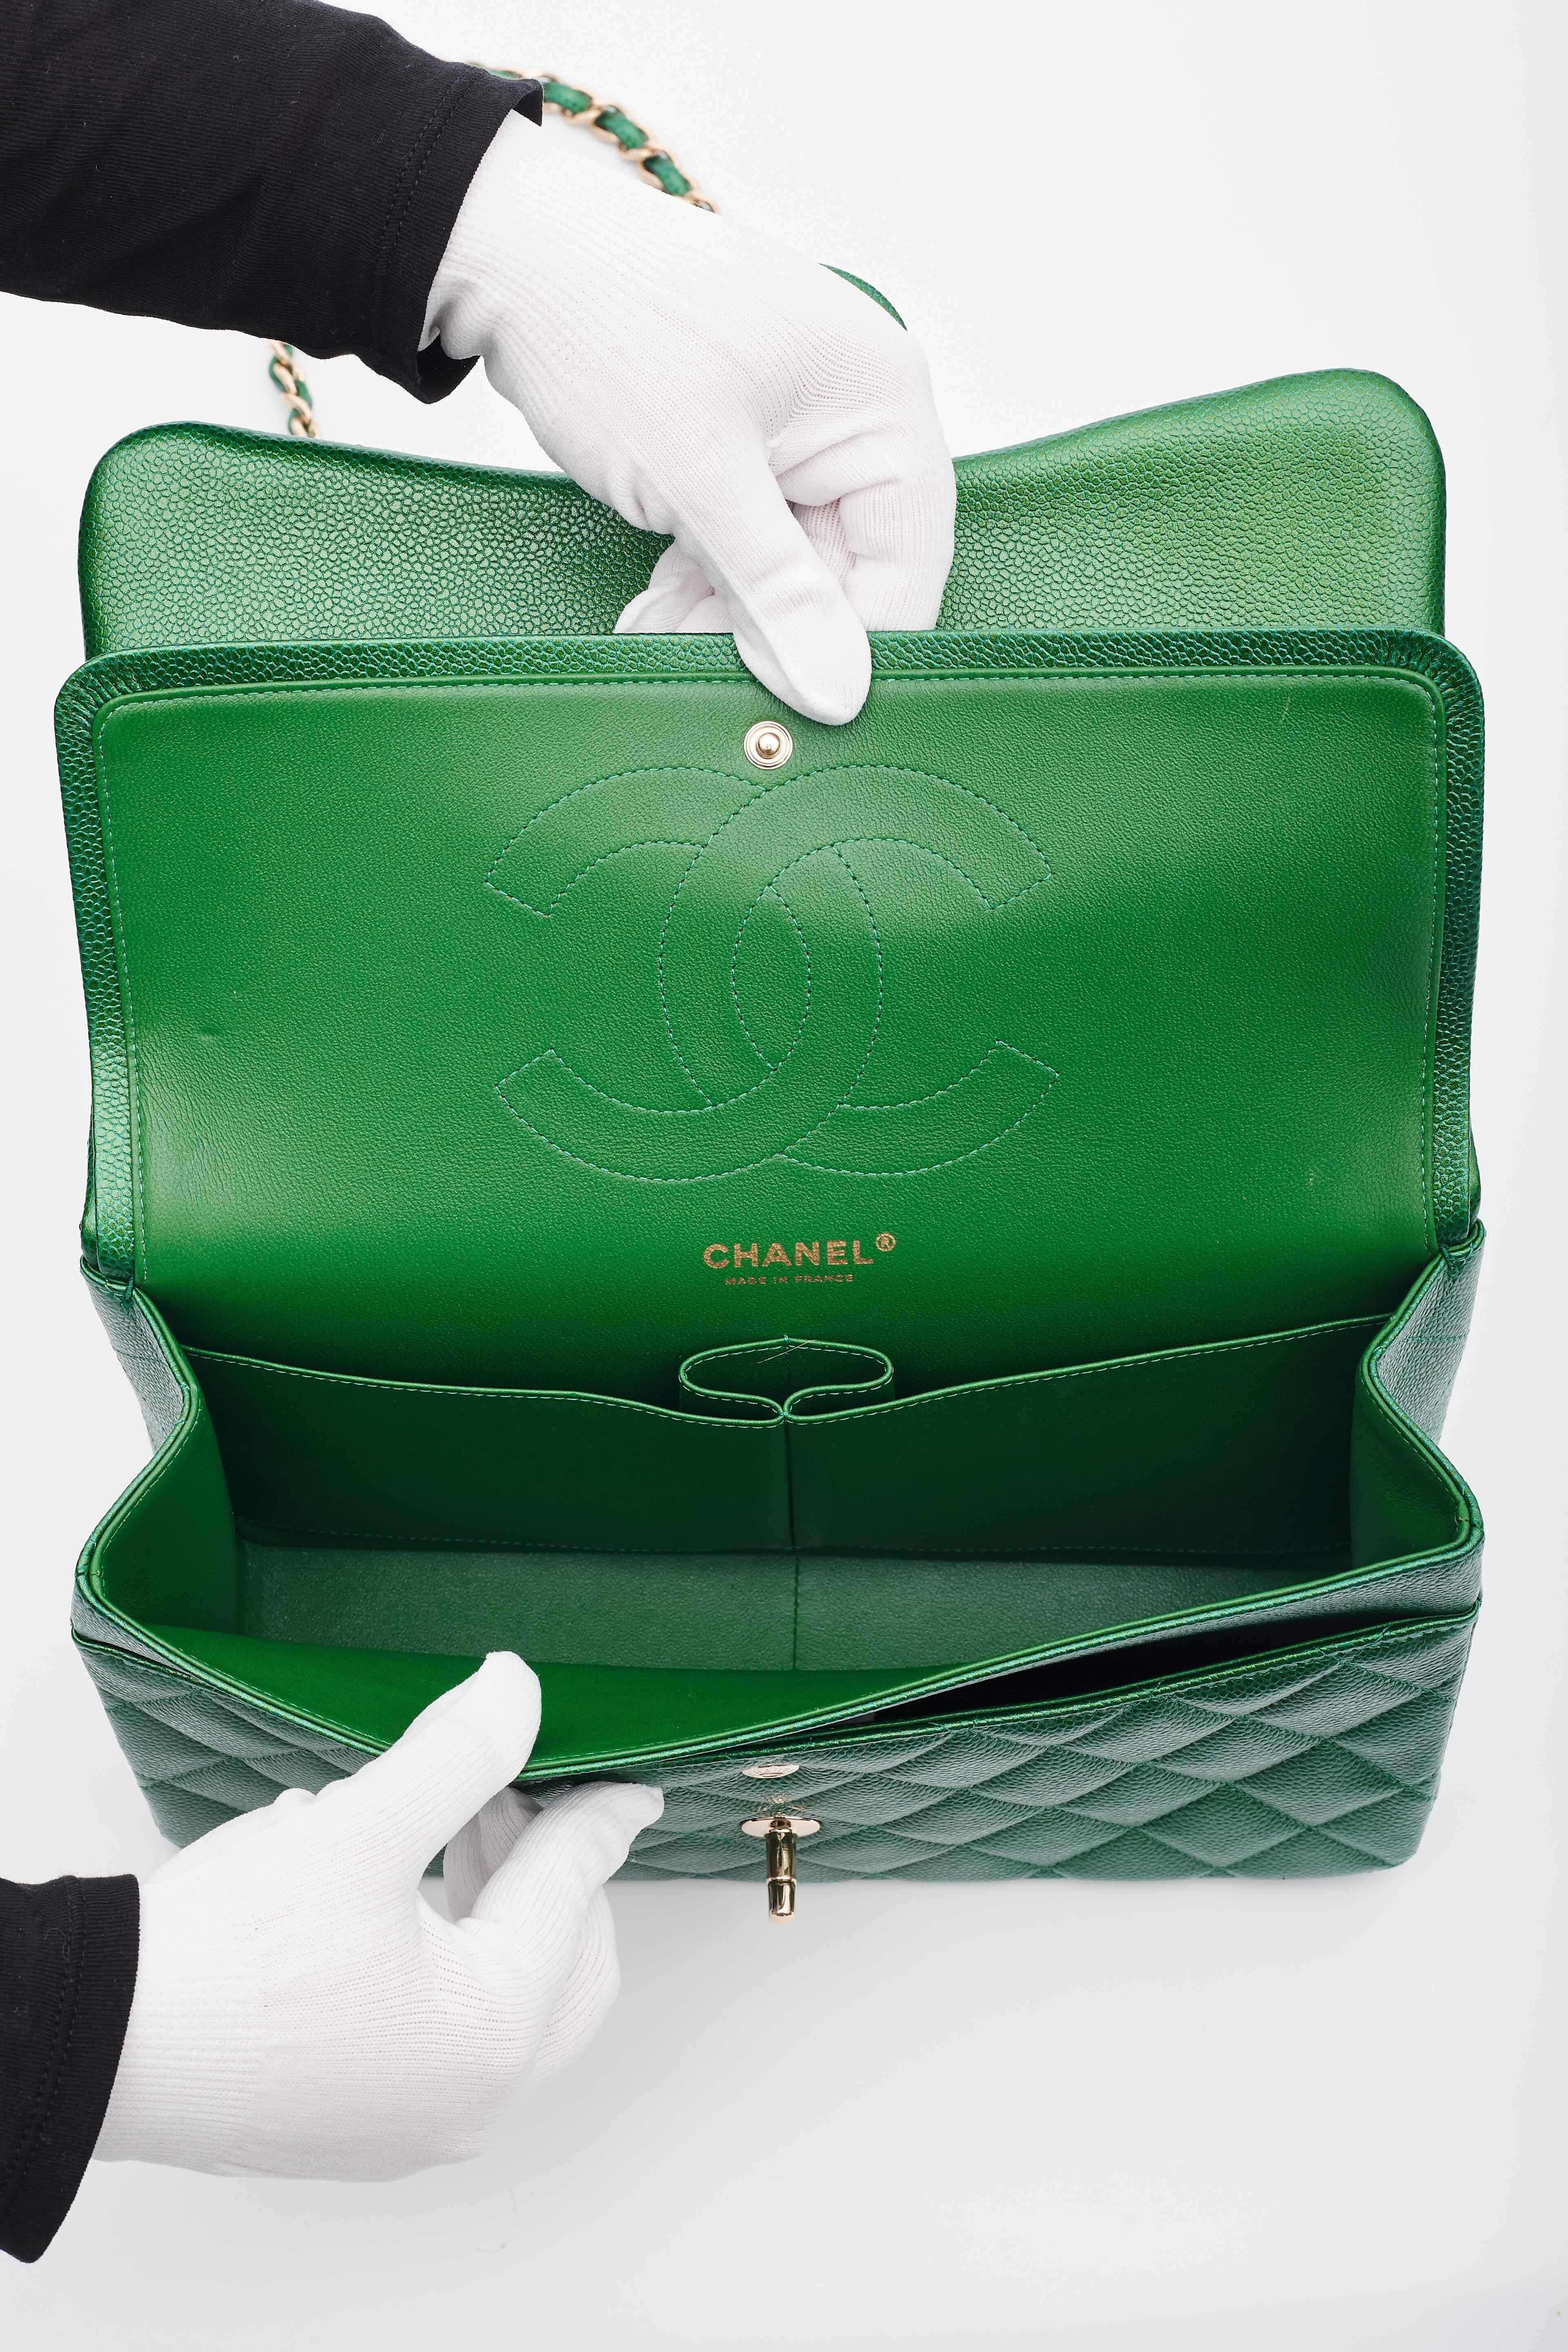 Chanel Caviar Pearly Green Leather Jumbo Classic Double Flap Bag 2018s W Gold For Sale 7